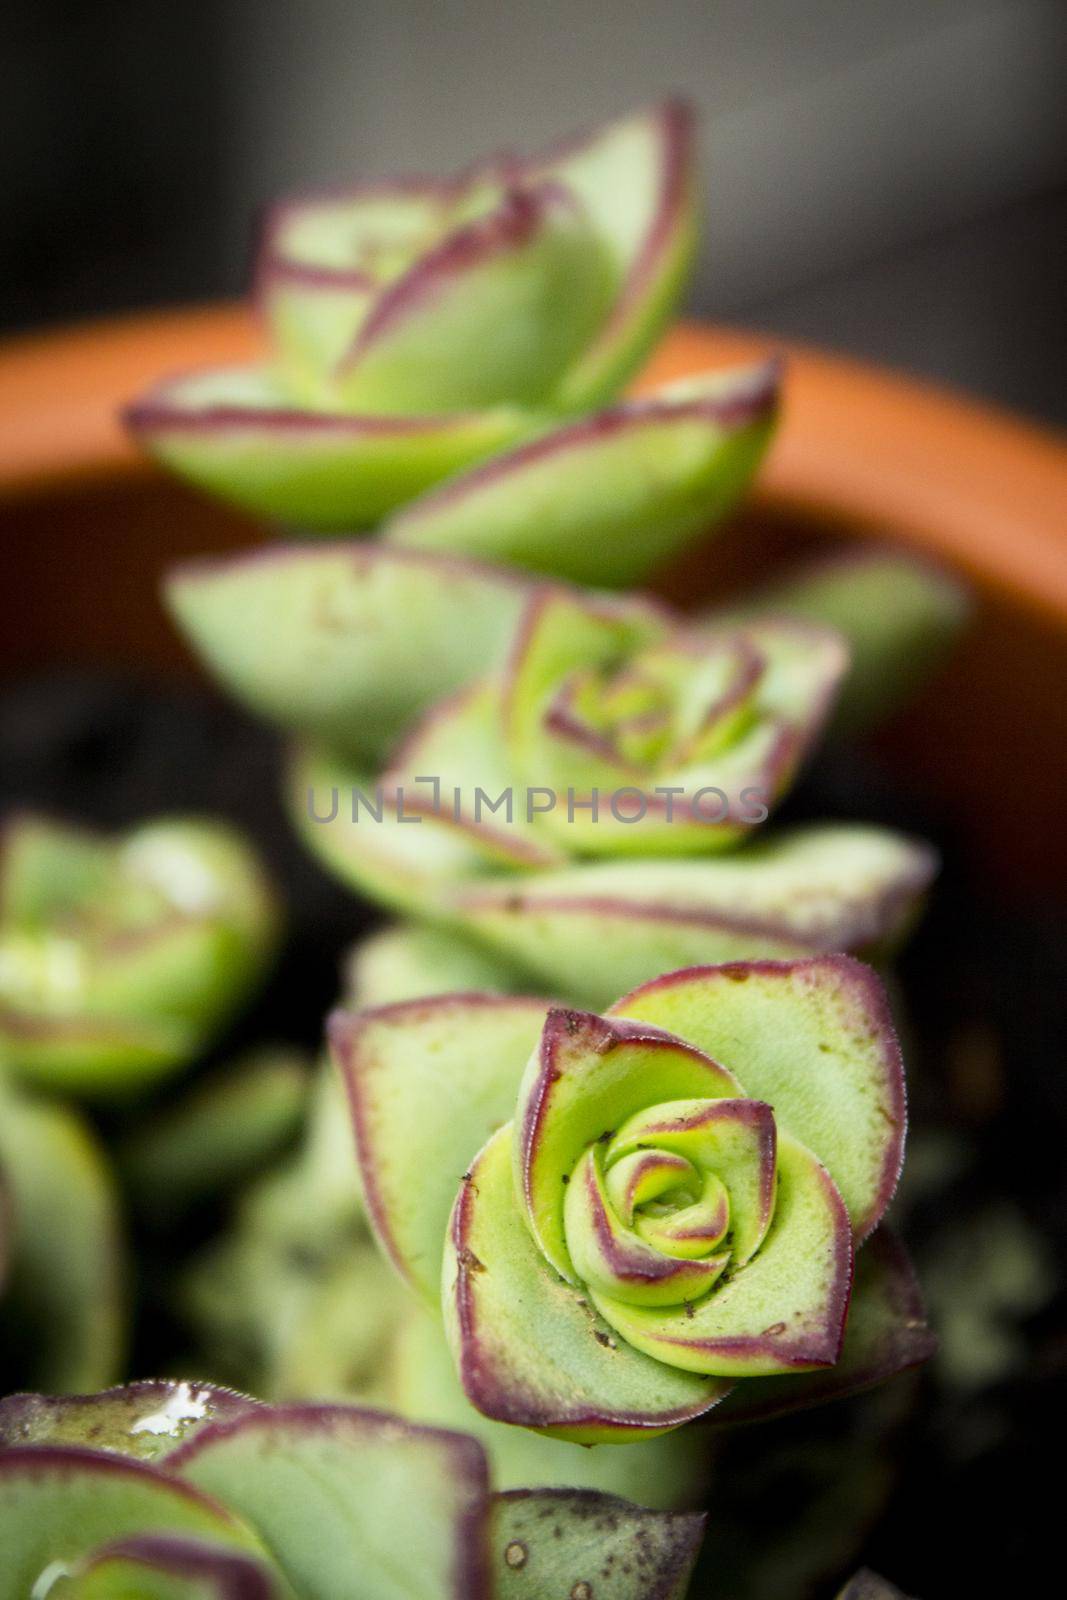 Succulent plant with rose shaped ramifications. Green an red color